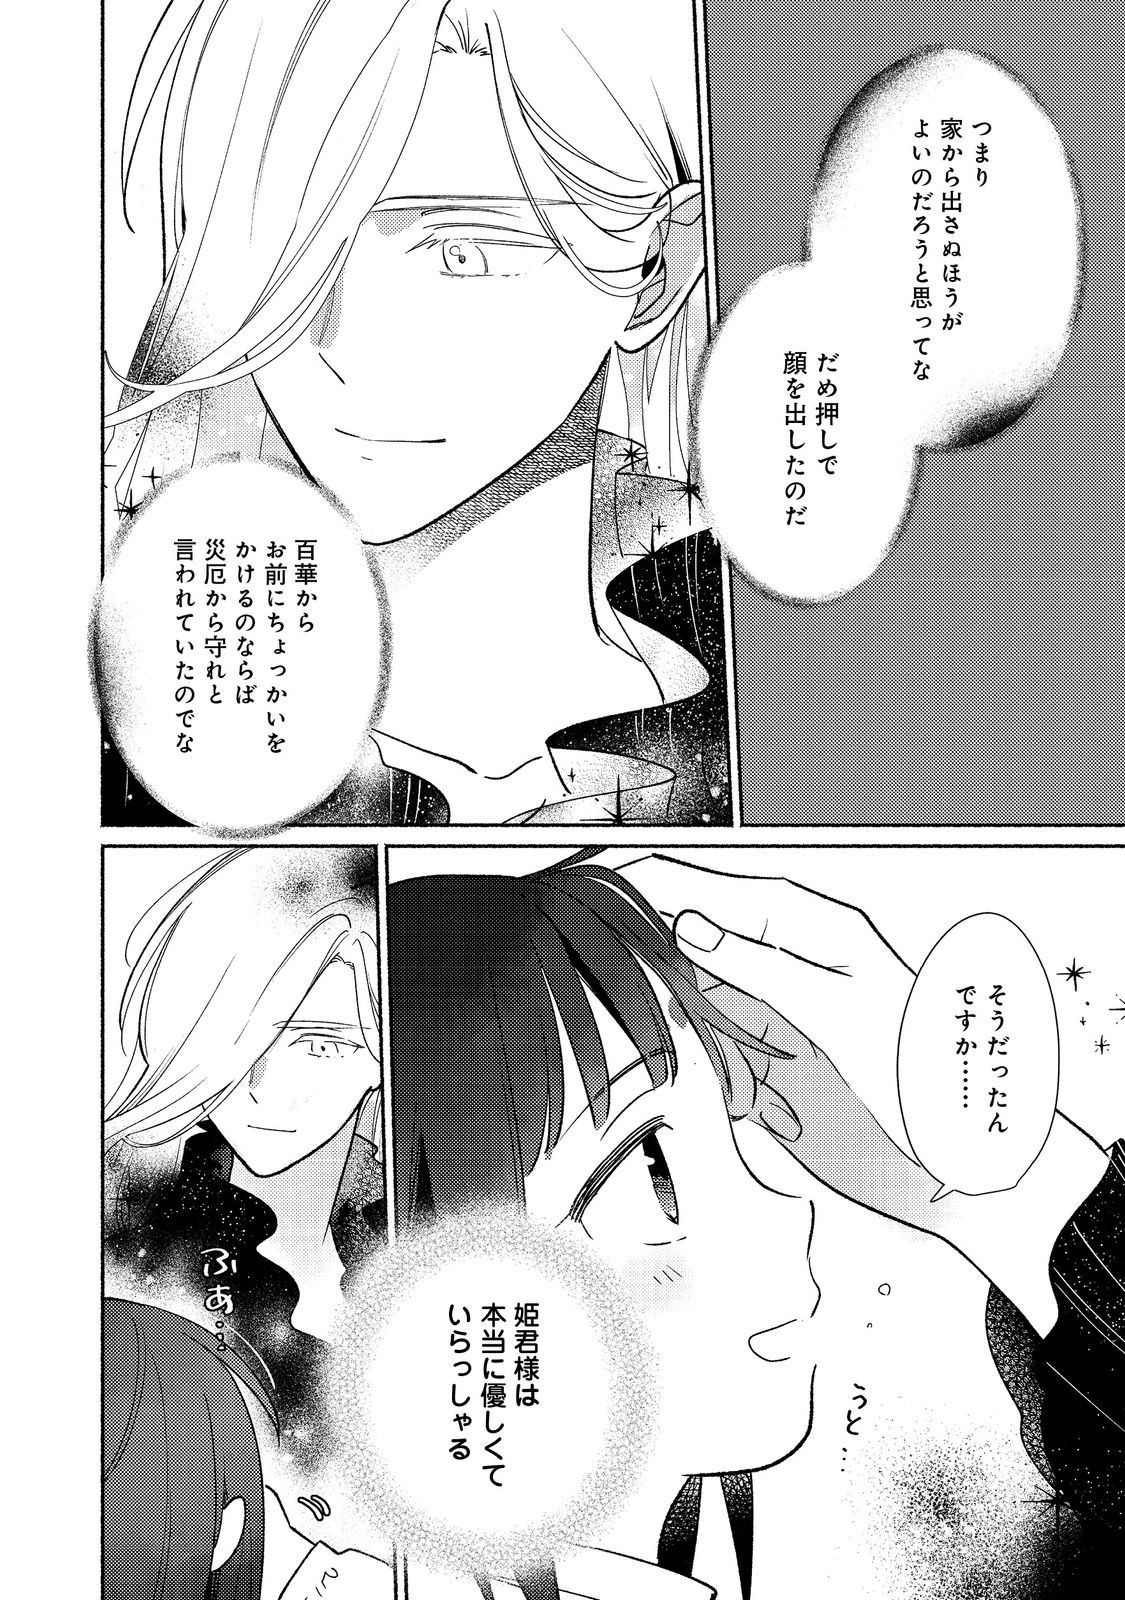 I’m the White Pig Nobleman 第23.2話 - Page 3